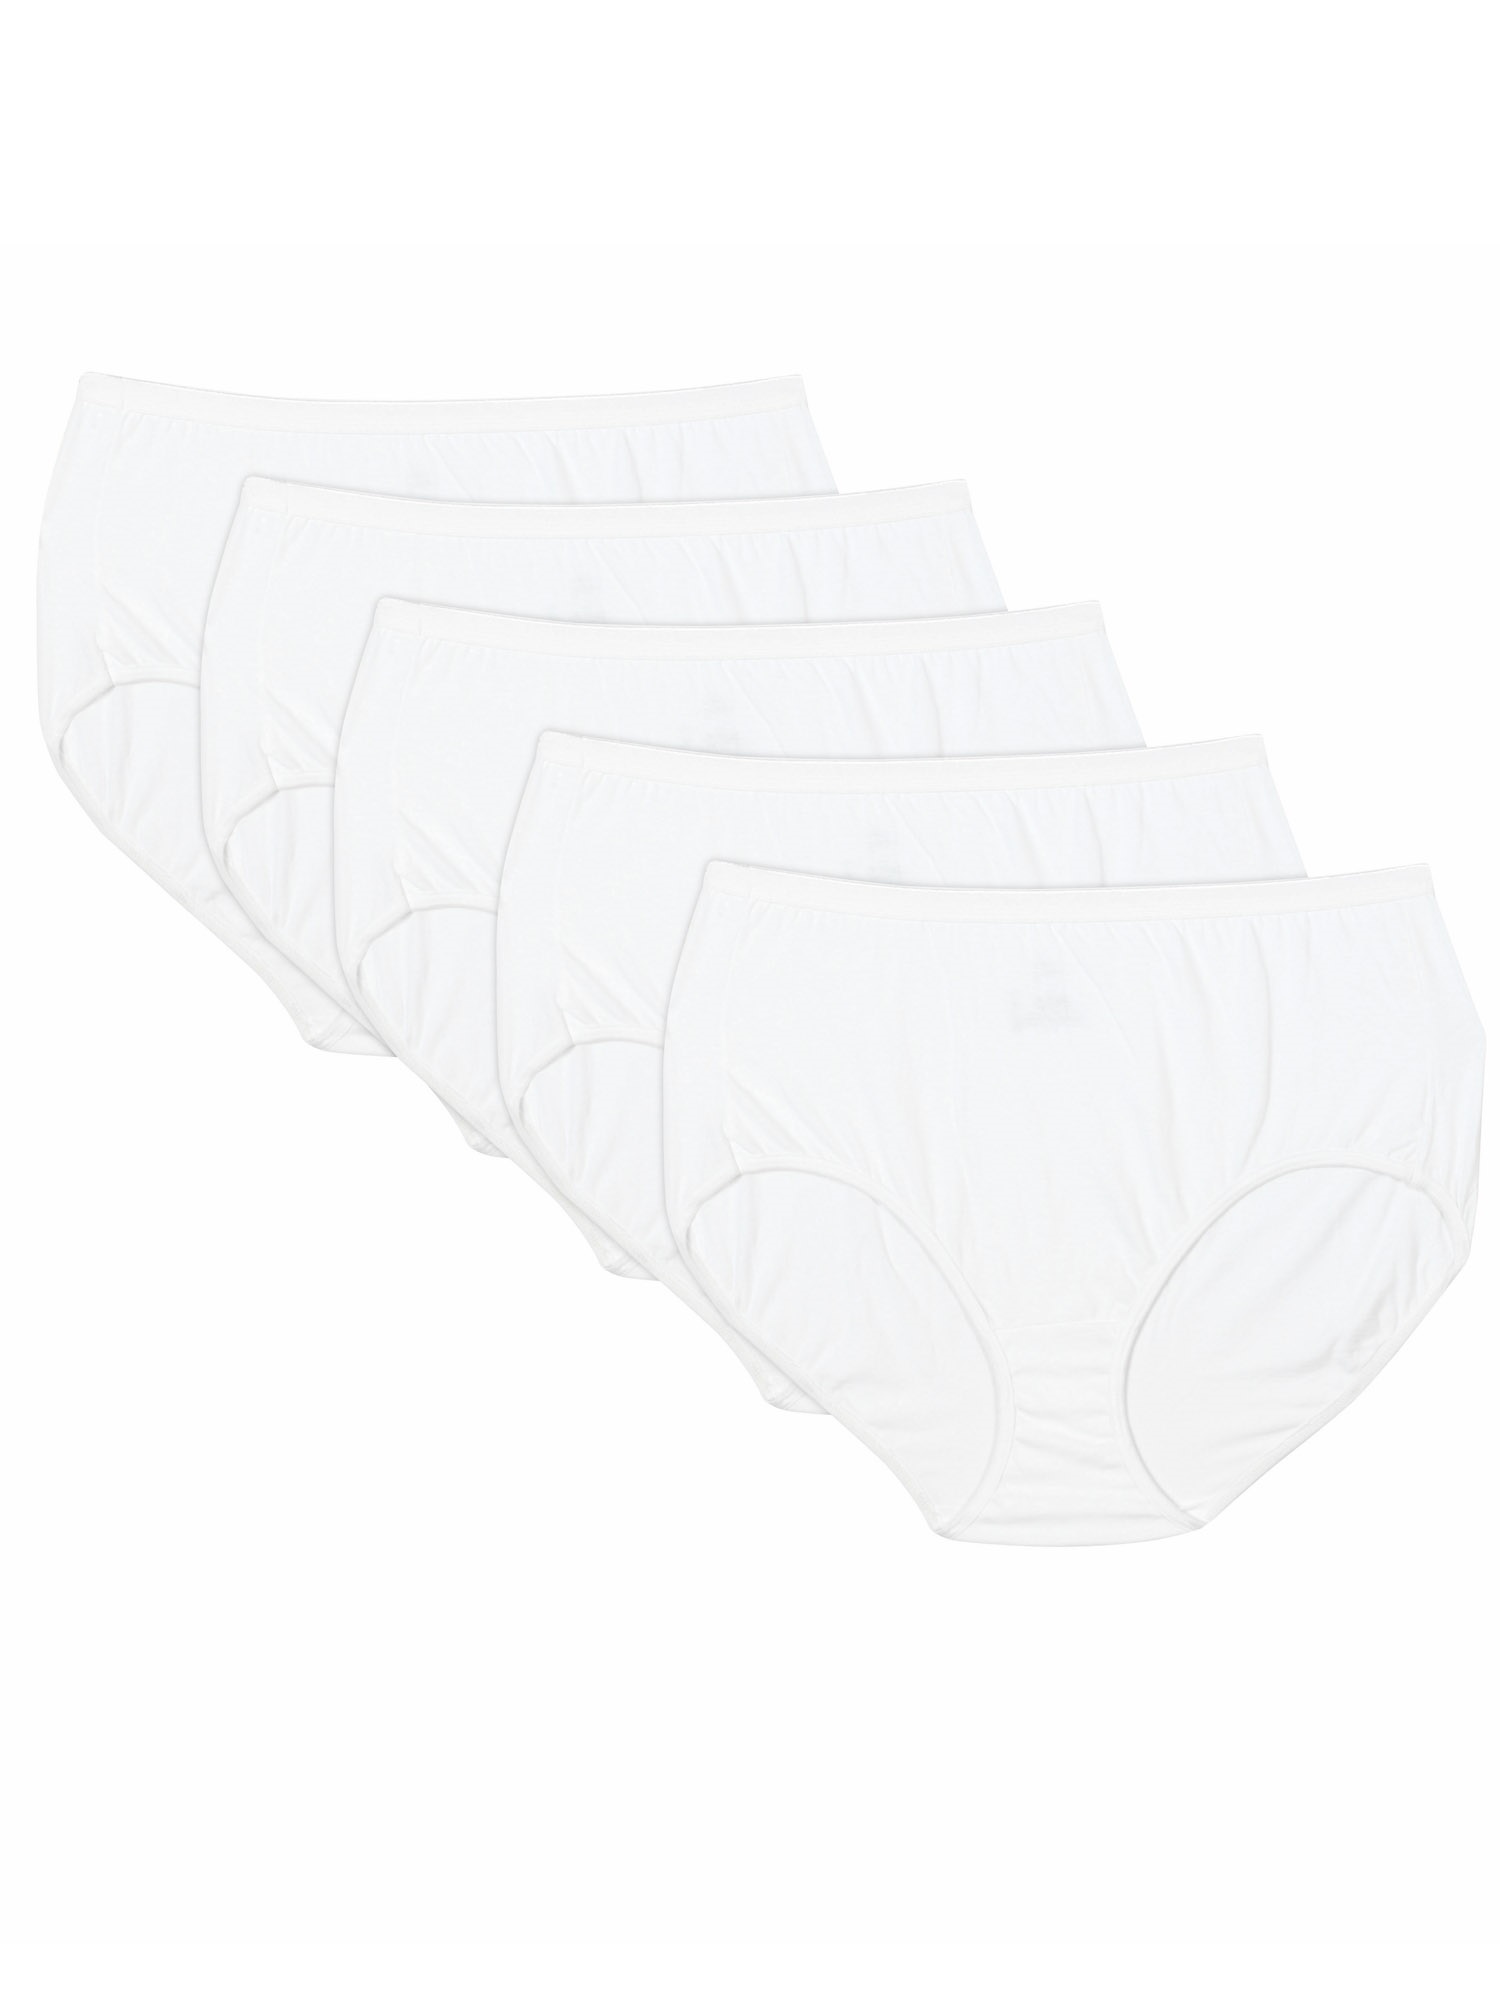 Just My Size Women's Plus Tagless White Cotton Briefs 5-Pack - image 2 of 4